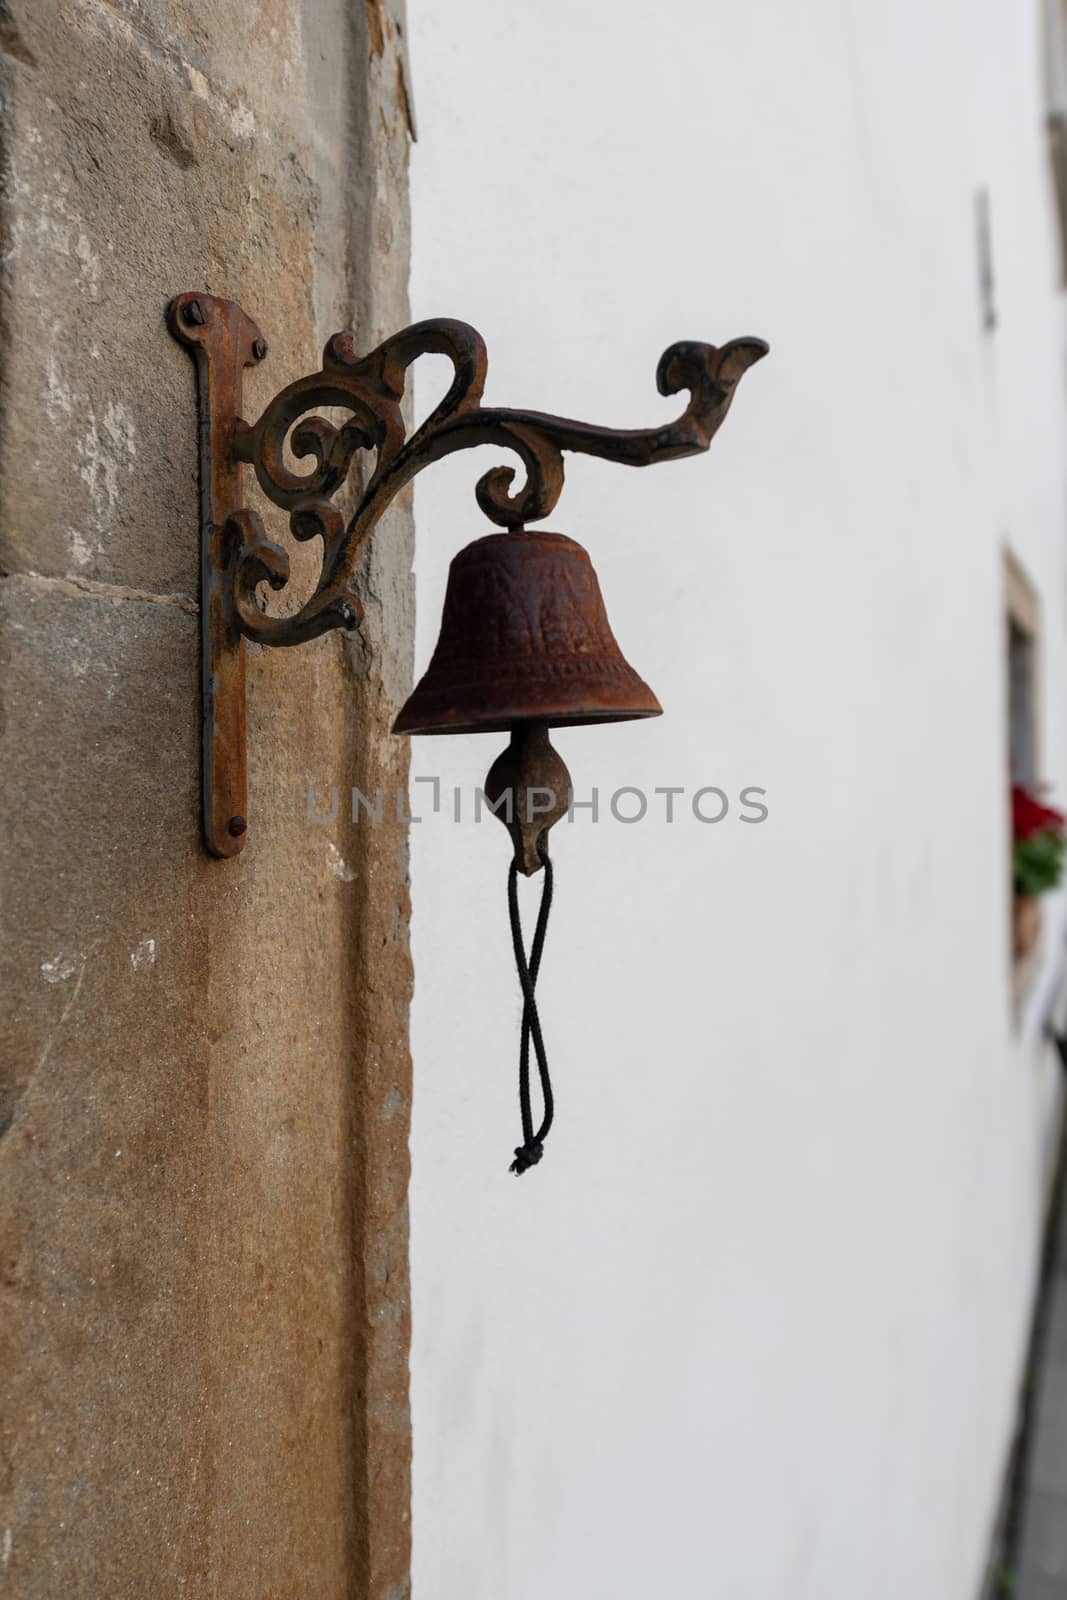 Vintage old metal bell hang on stone arch, background captured in front view